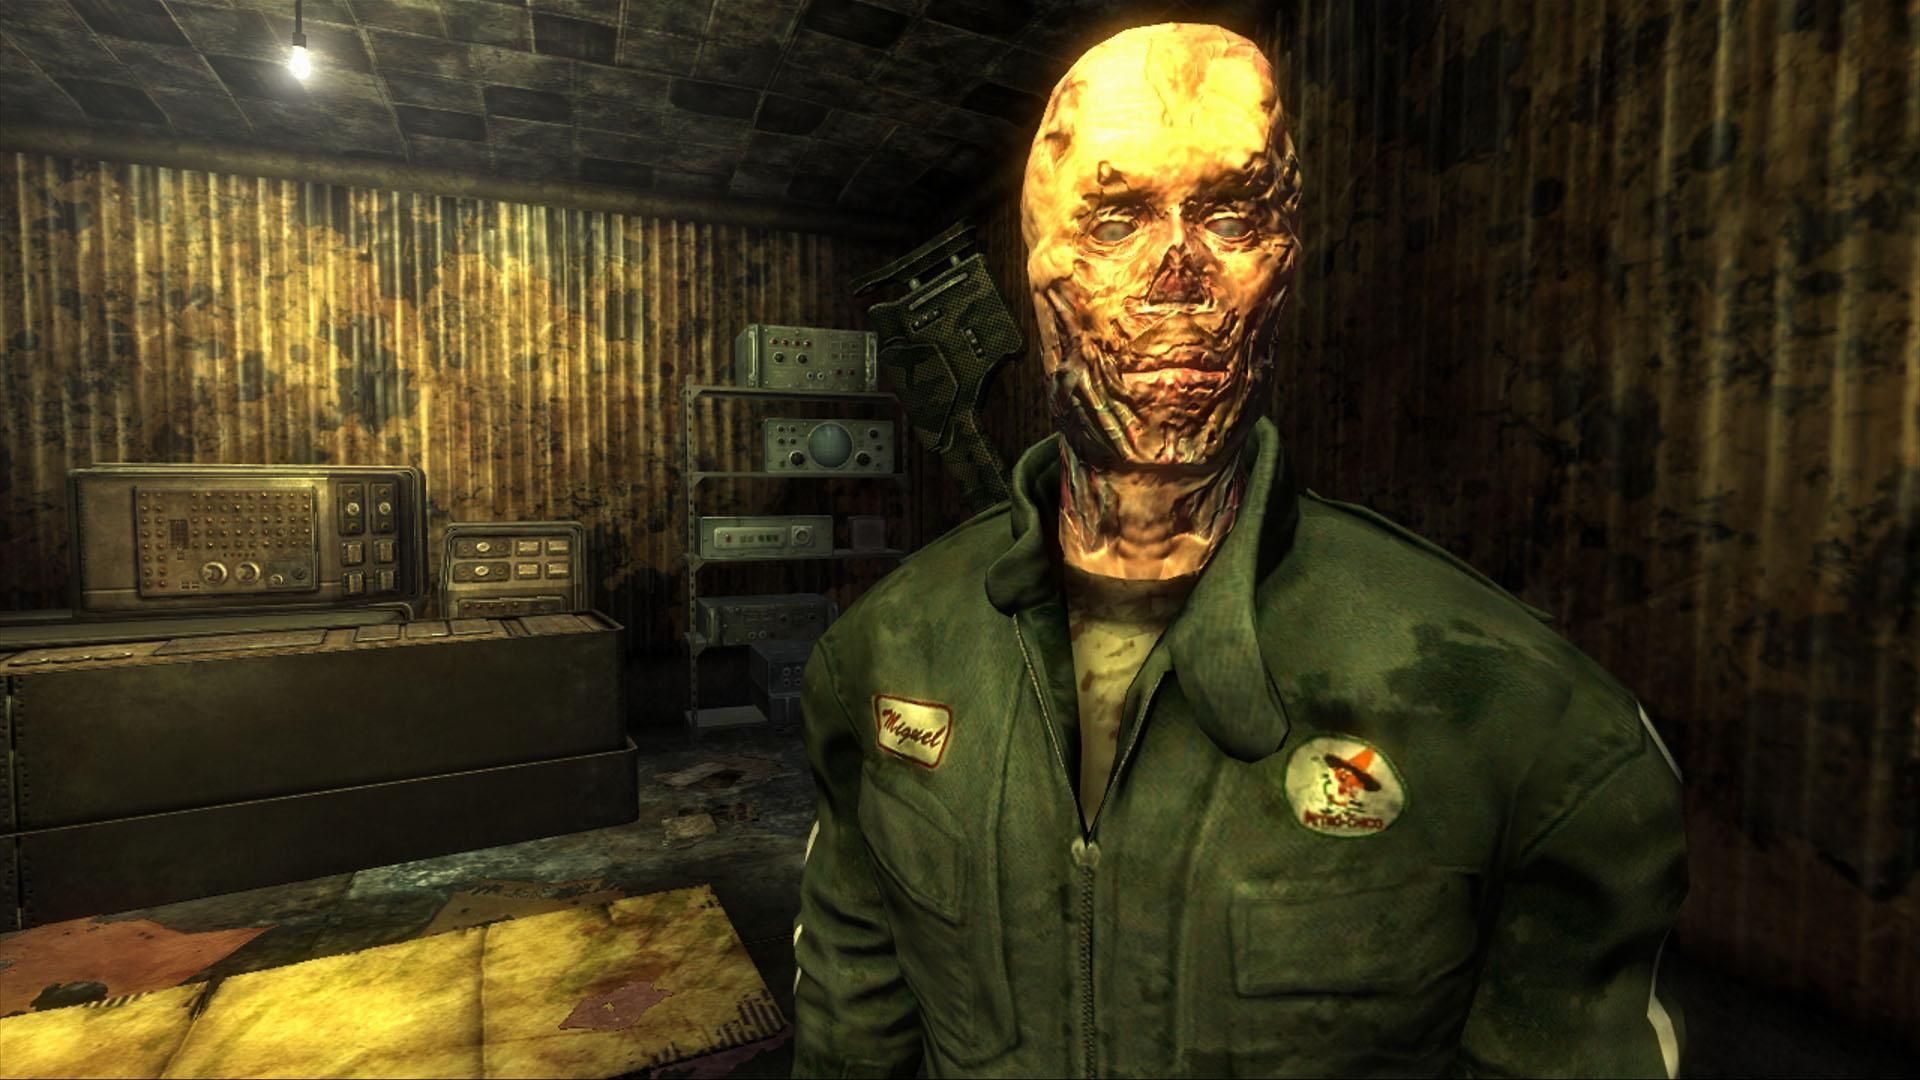 Sorry, but I liked Fallout: New Vegas better than Fallout 4